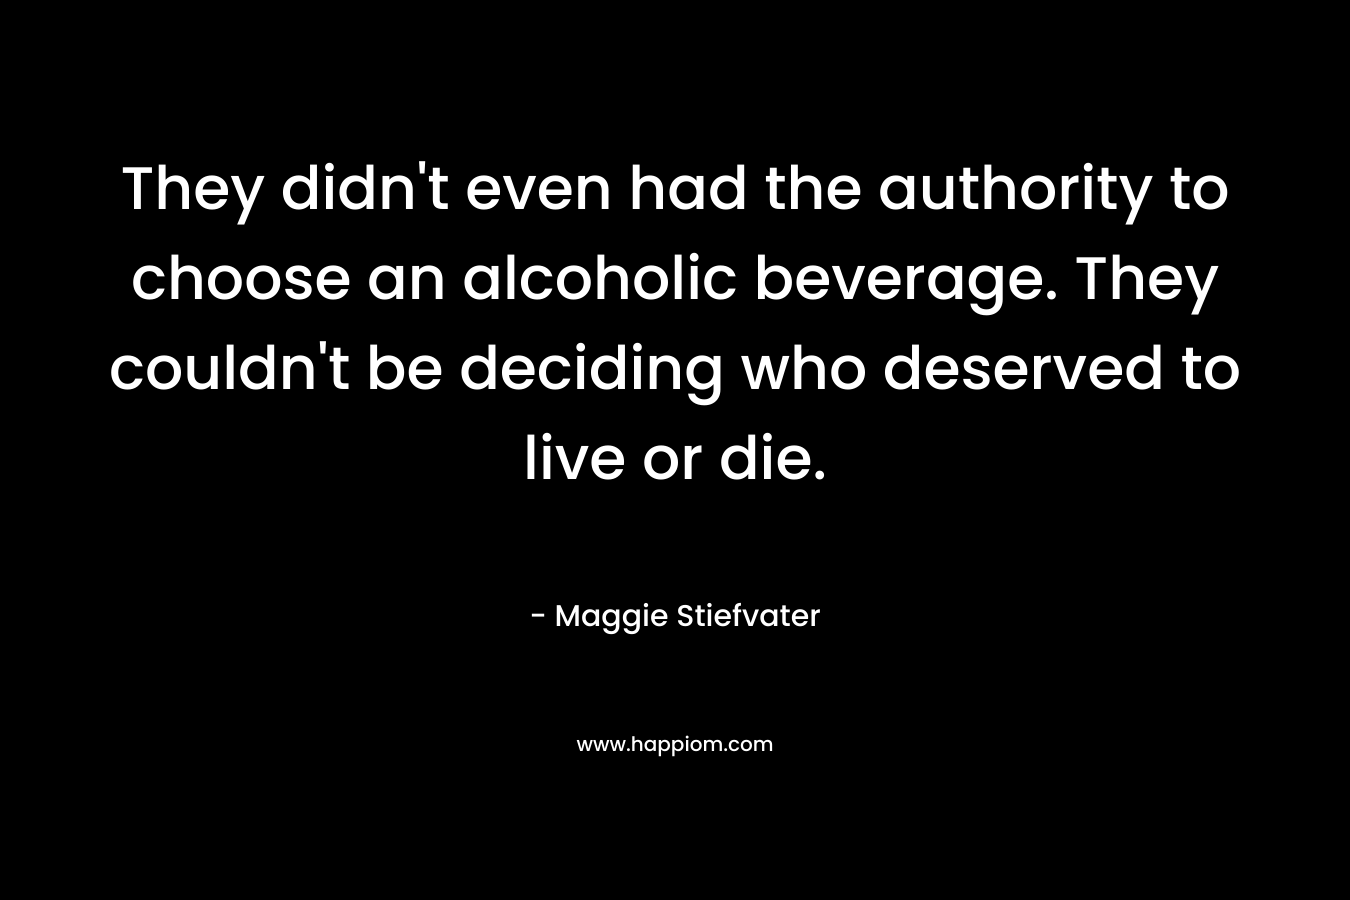 They didn't even had the authority to choose an alcoholic beverage. They couldn't be deciding who deserved to live or die.